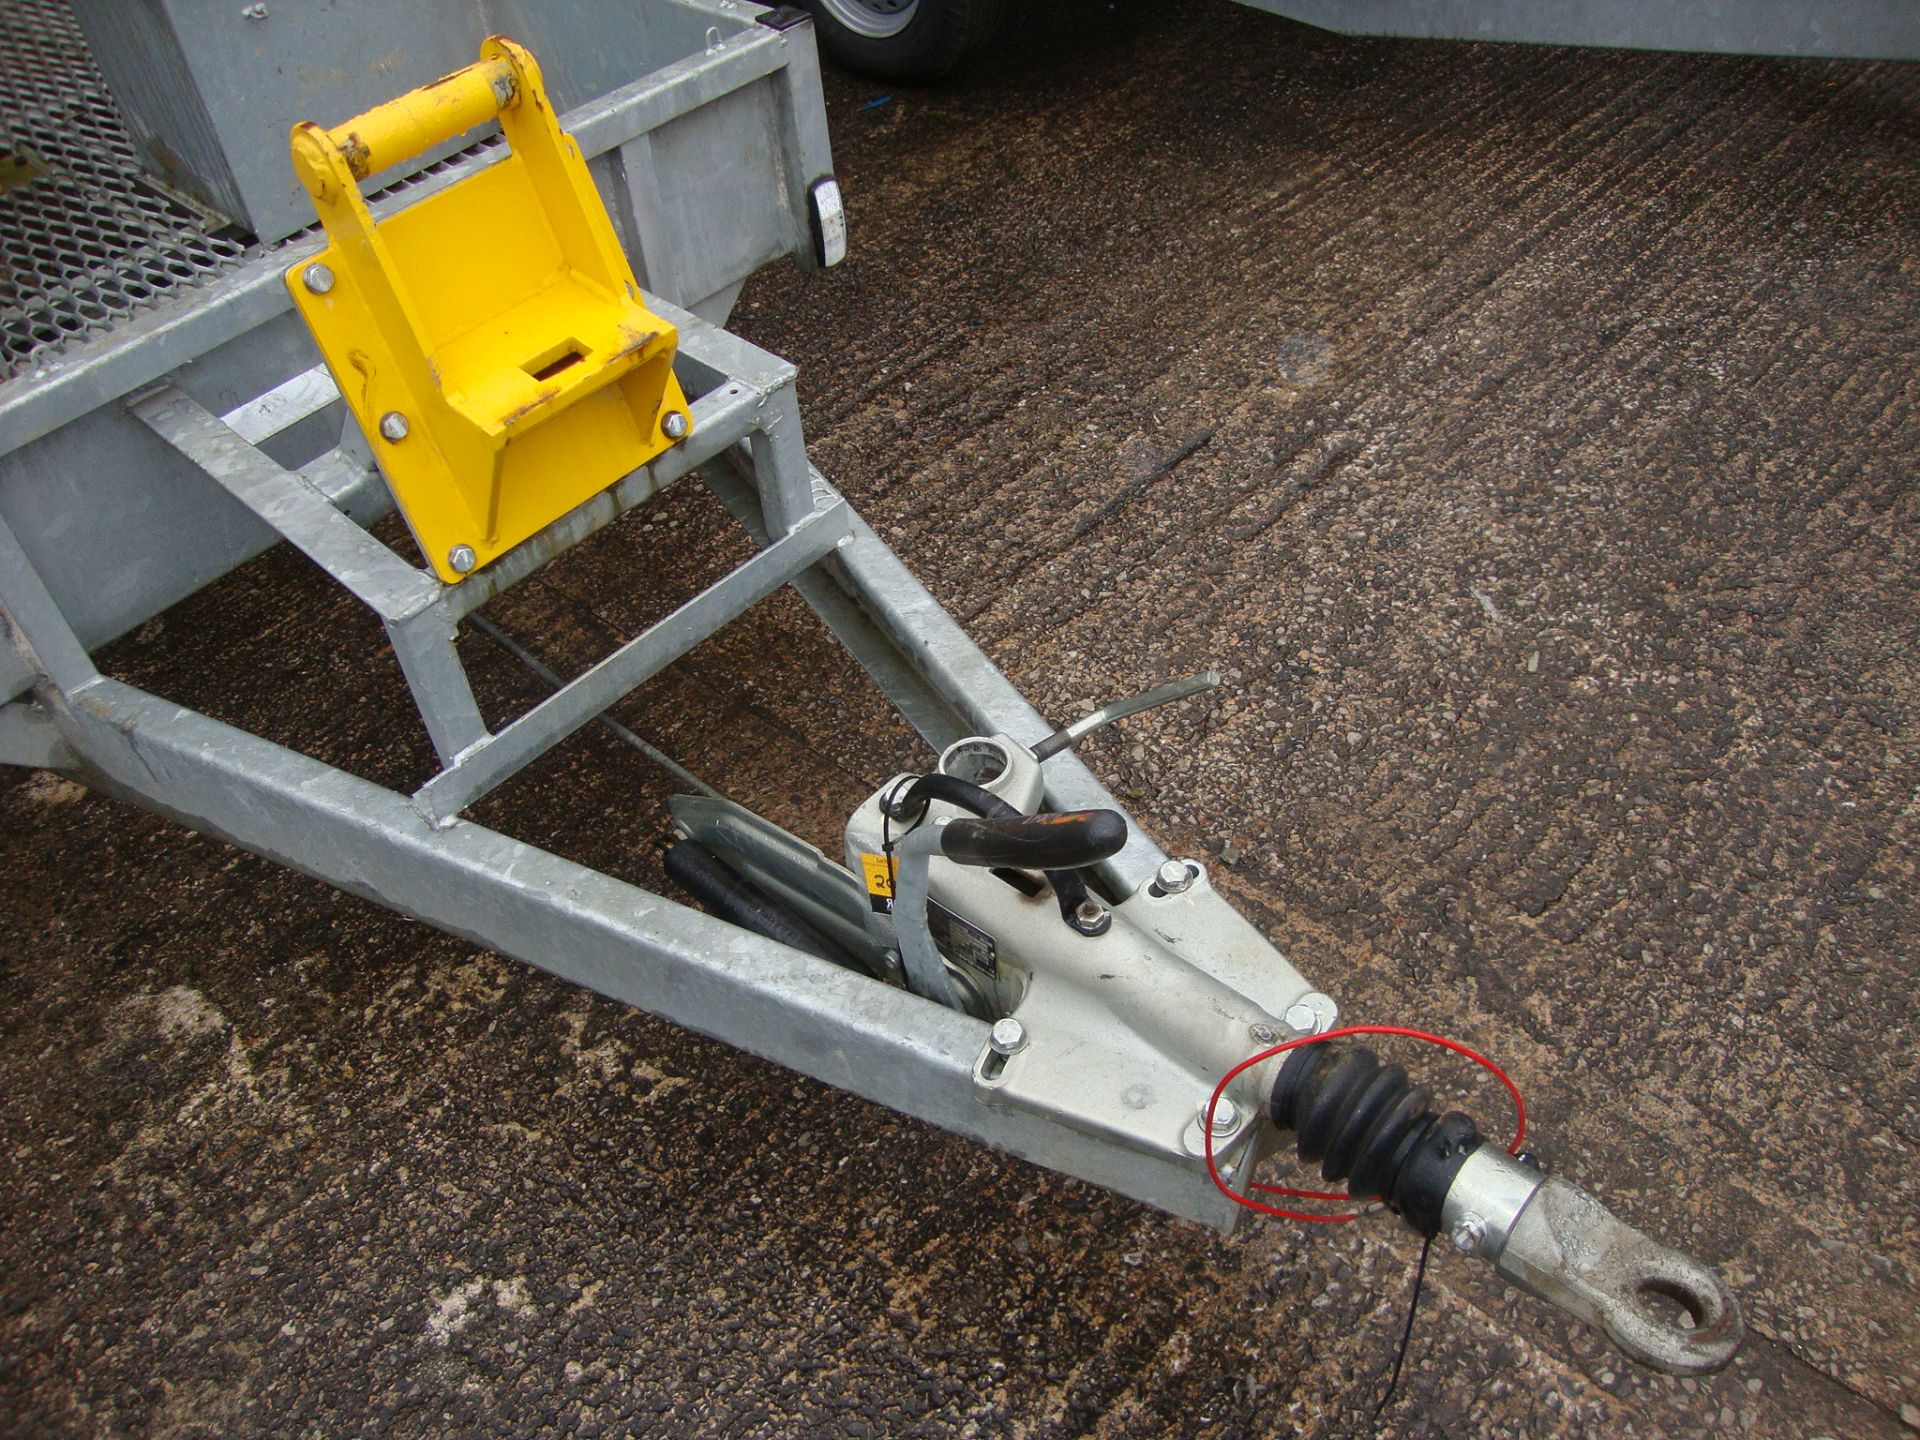 Mini digger/excavator specialist trailer incorporating large drive-on ramp at rear, shrouds for - Image 4 of 9